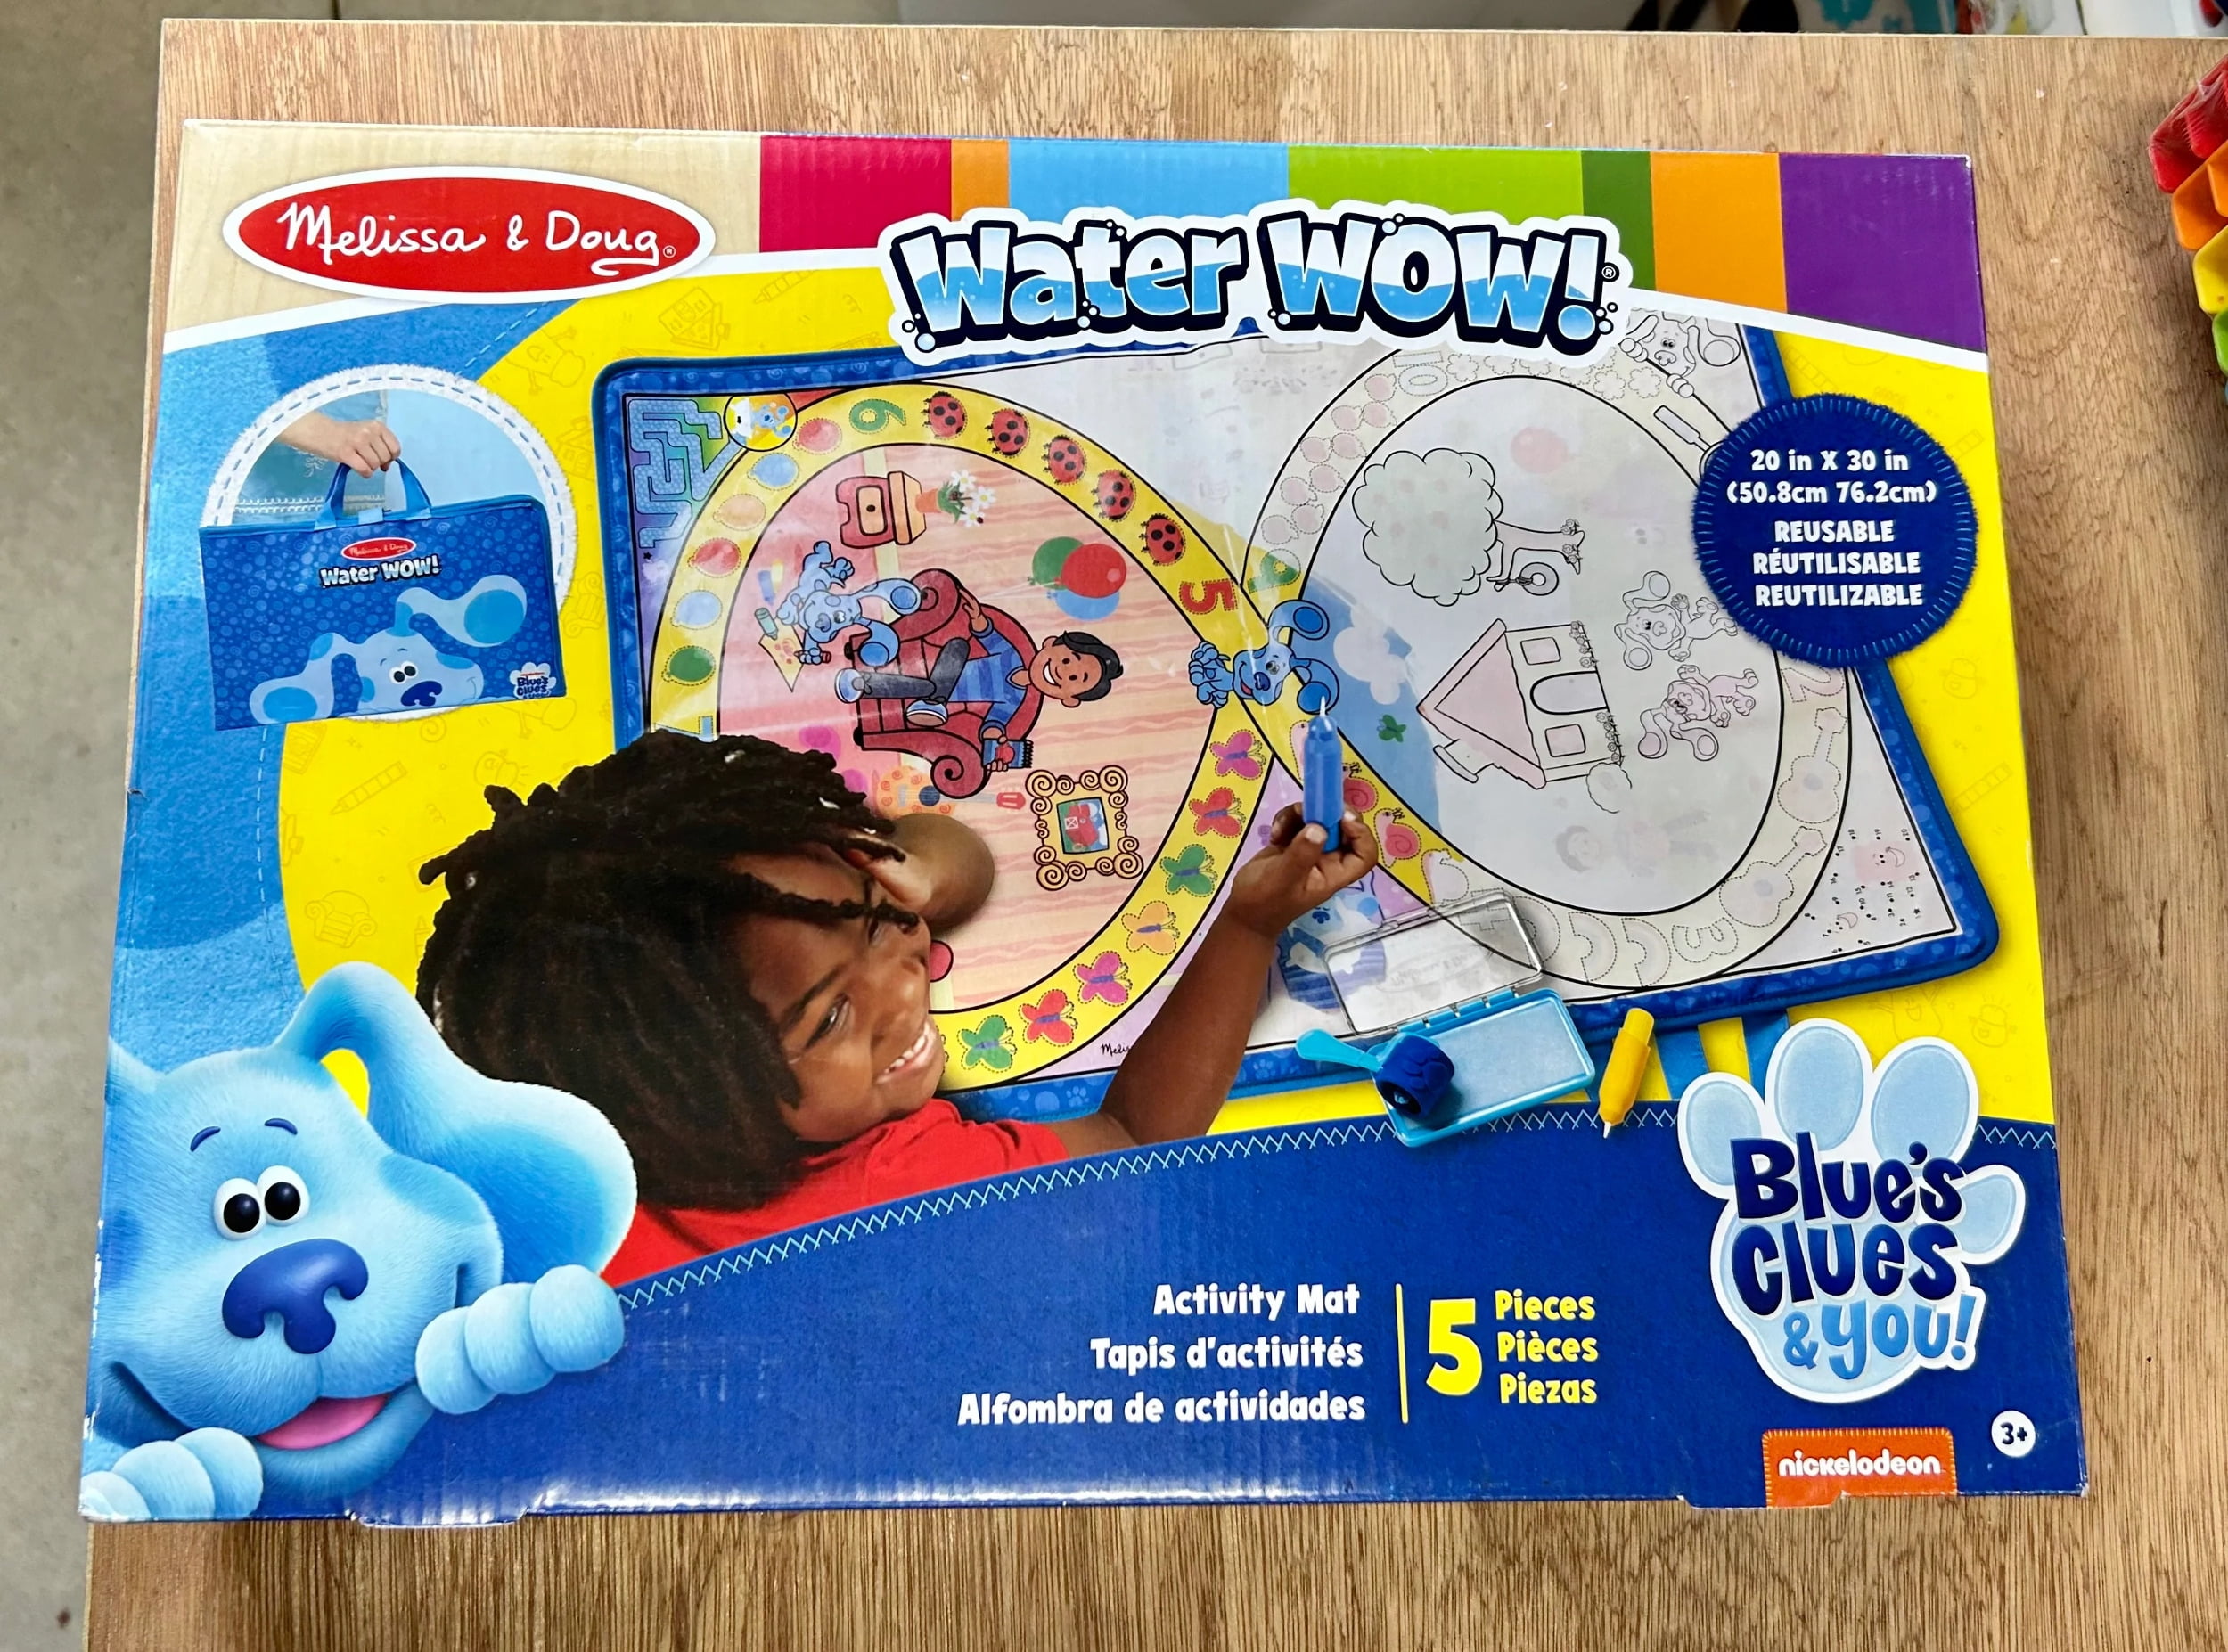 BlueS Clues Water Wow! 3 books *Alphabet Counting Shapes Water Reveal Josh  B6